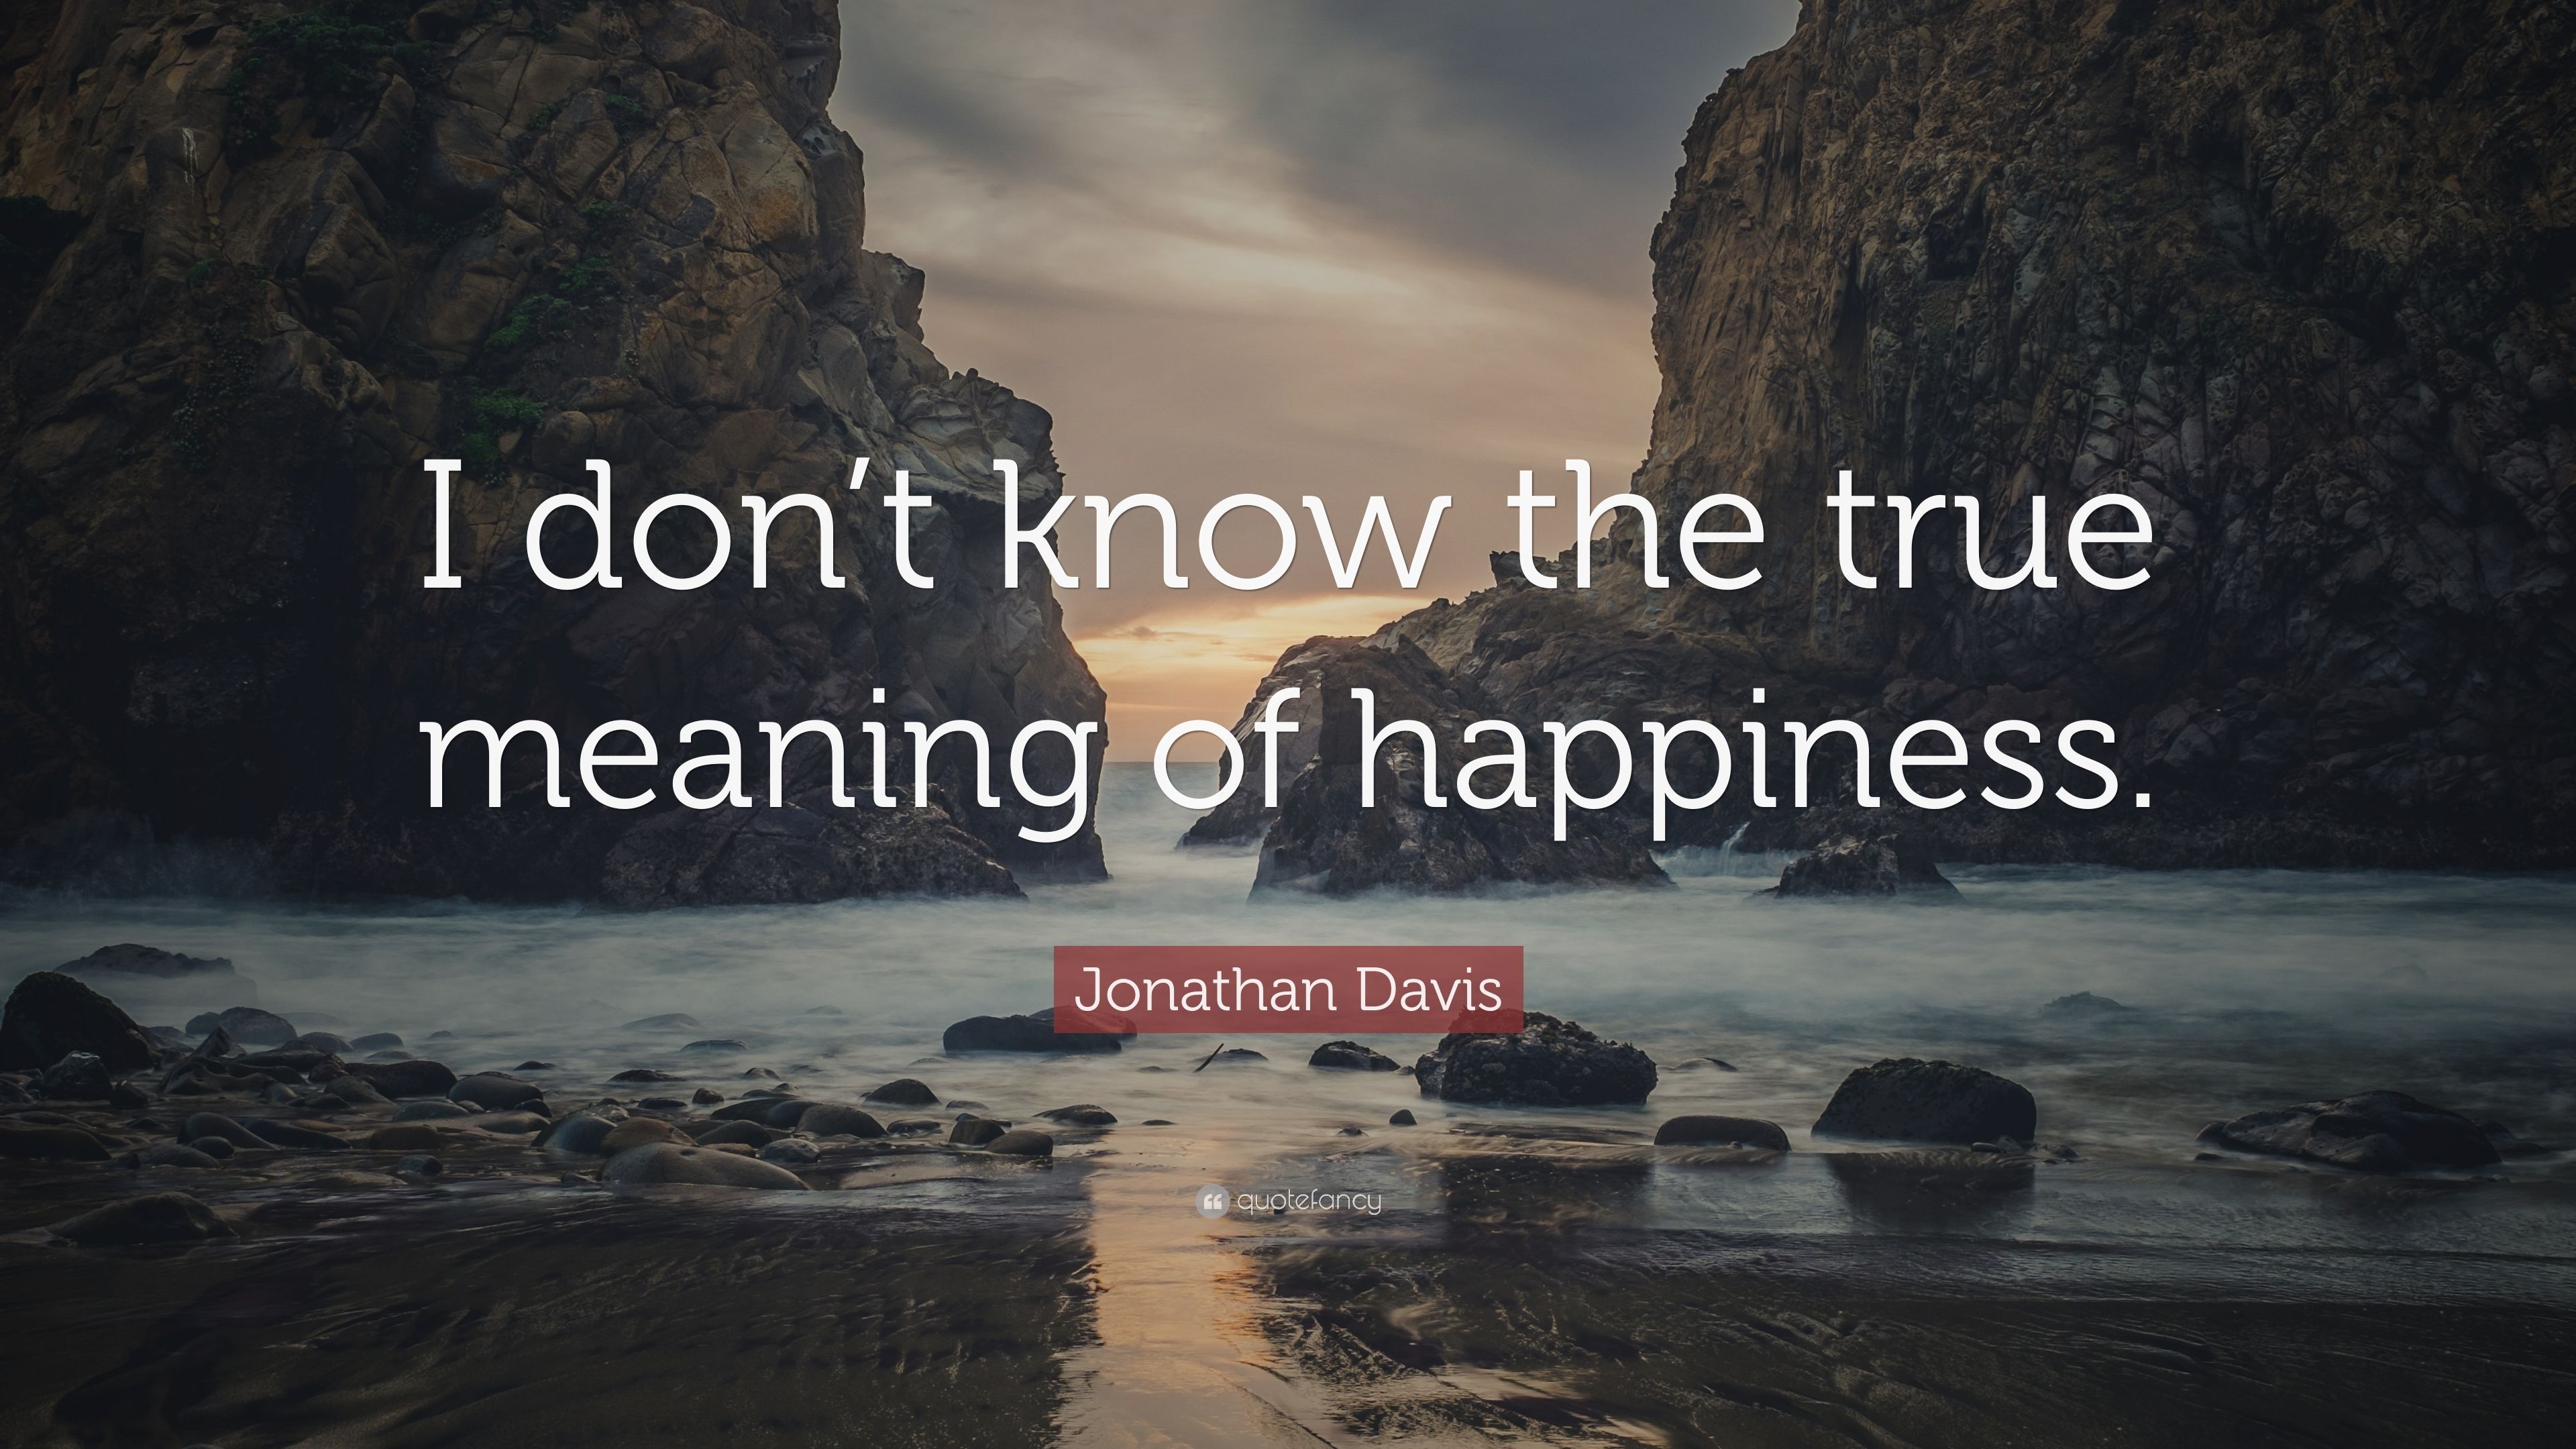 Jonathan Davis Quote: "I don't know the true meaning of happiness...